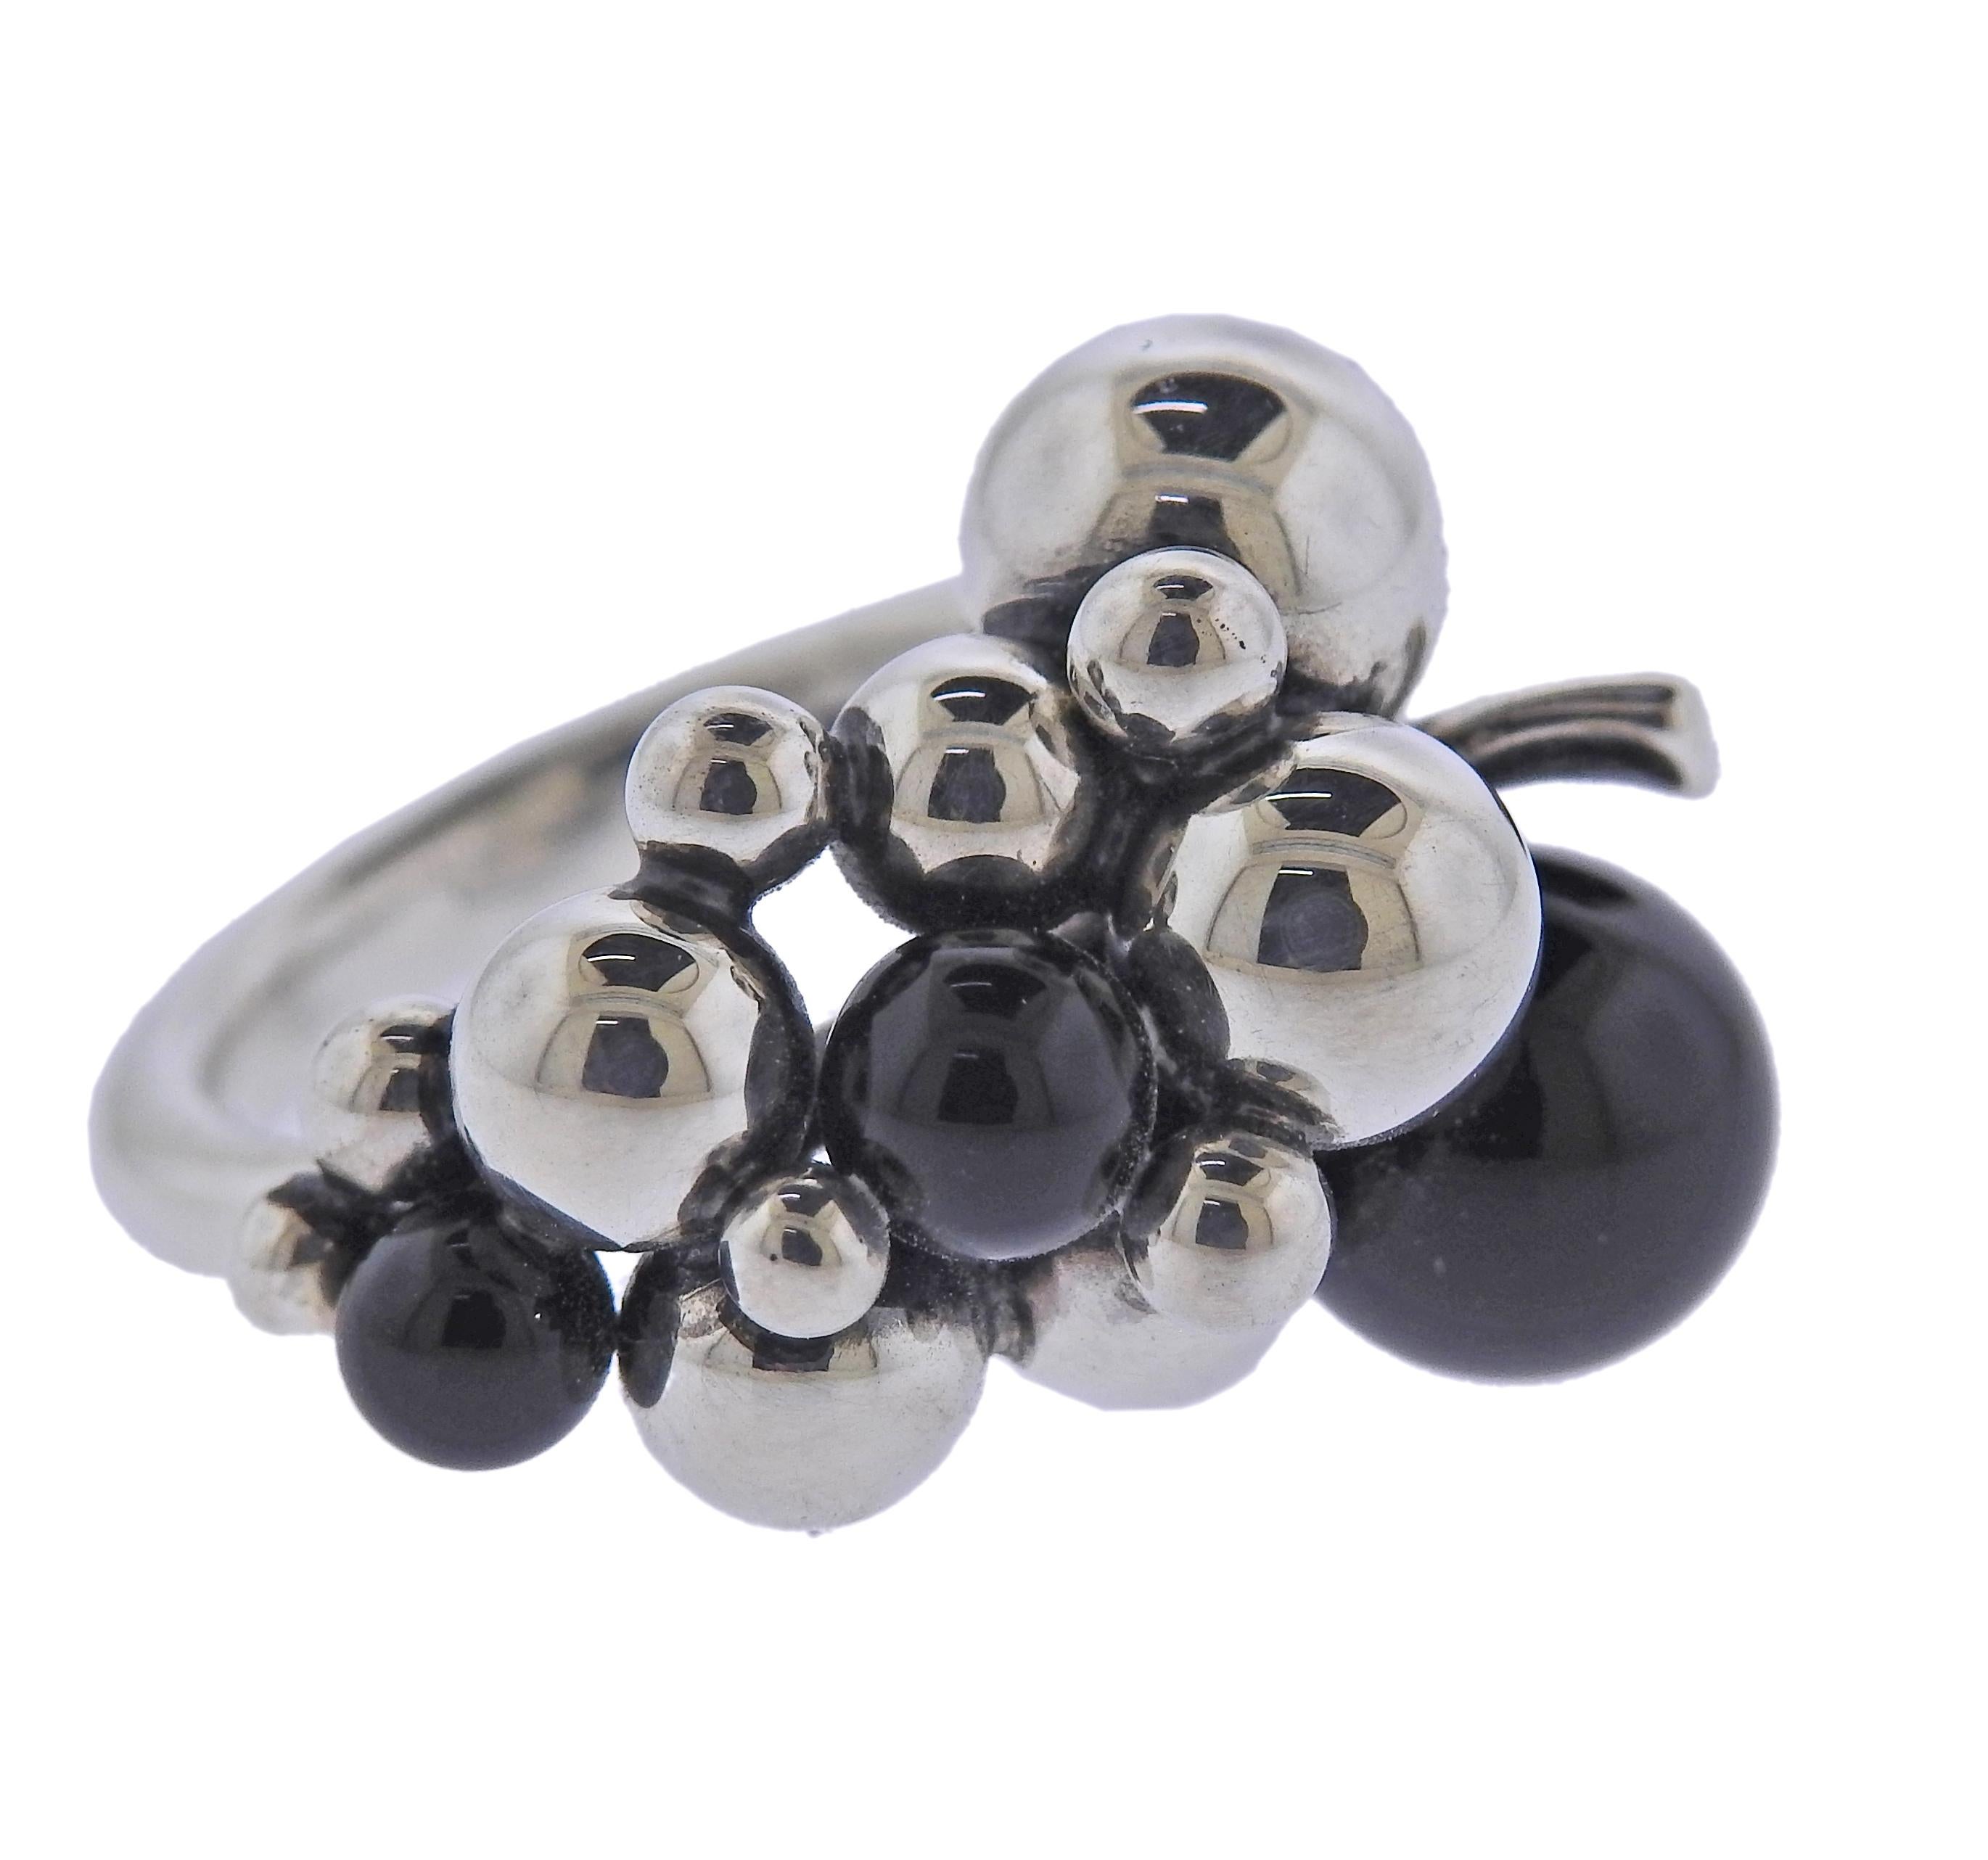 Brand new Georg Jensen sterling silver ring from Moonlight Grapes collection with onyx. Top of the ring - 24mm x 18mm. Available in sizes: 53 , 55, 54, 52 and 51. Model # 3559060. Marked: GJ mark, 925 S. Weight - 8.2 grams.